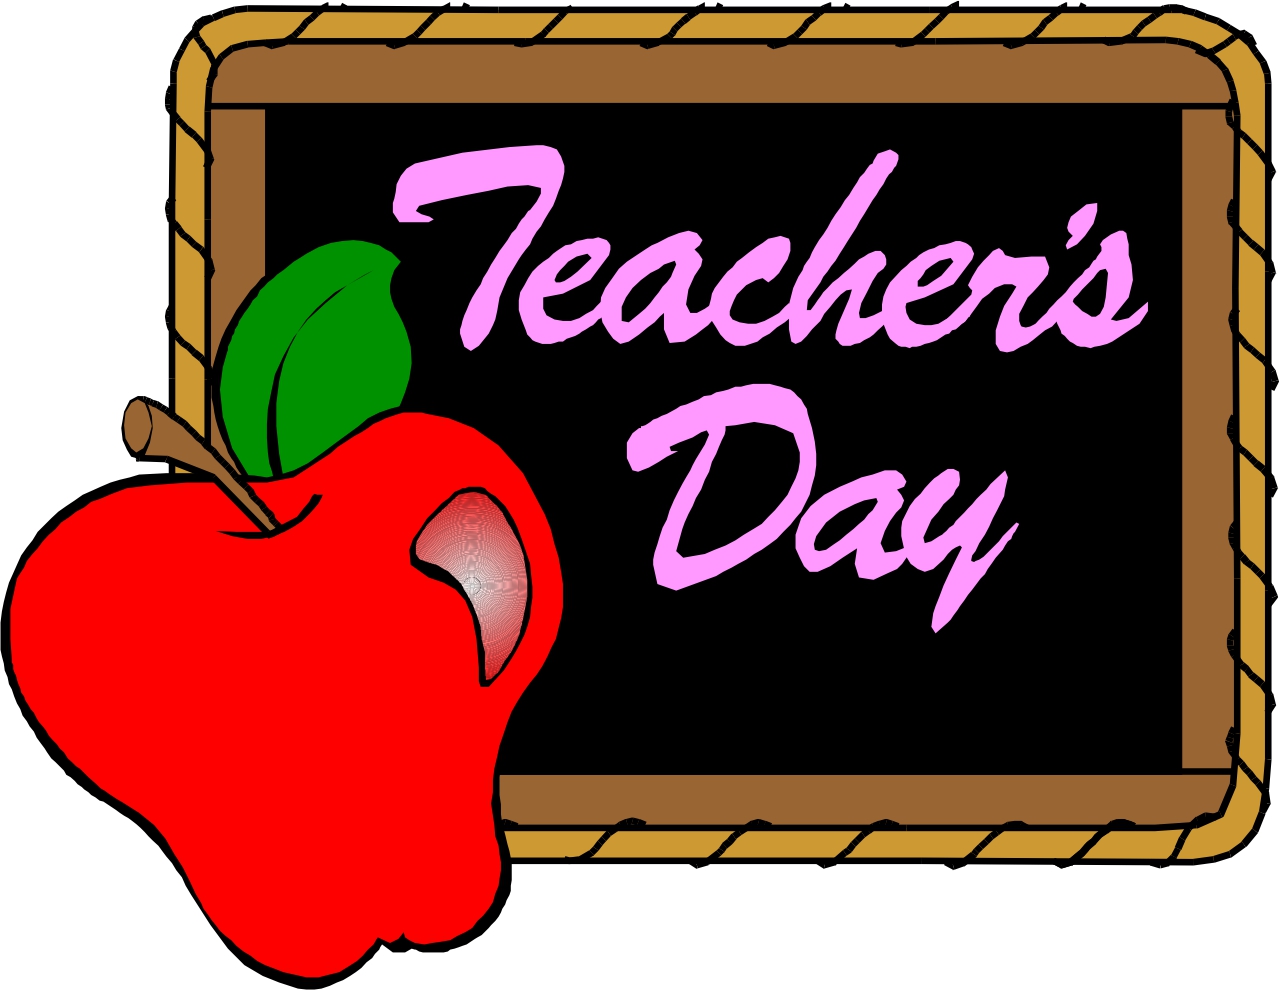 Happy Teachers Day 2014 Pictures, Images, ClipArt Photos | Happy ...